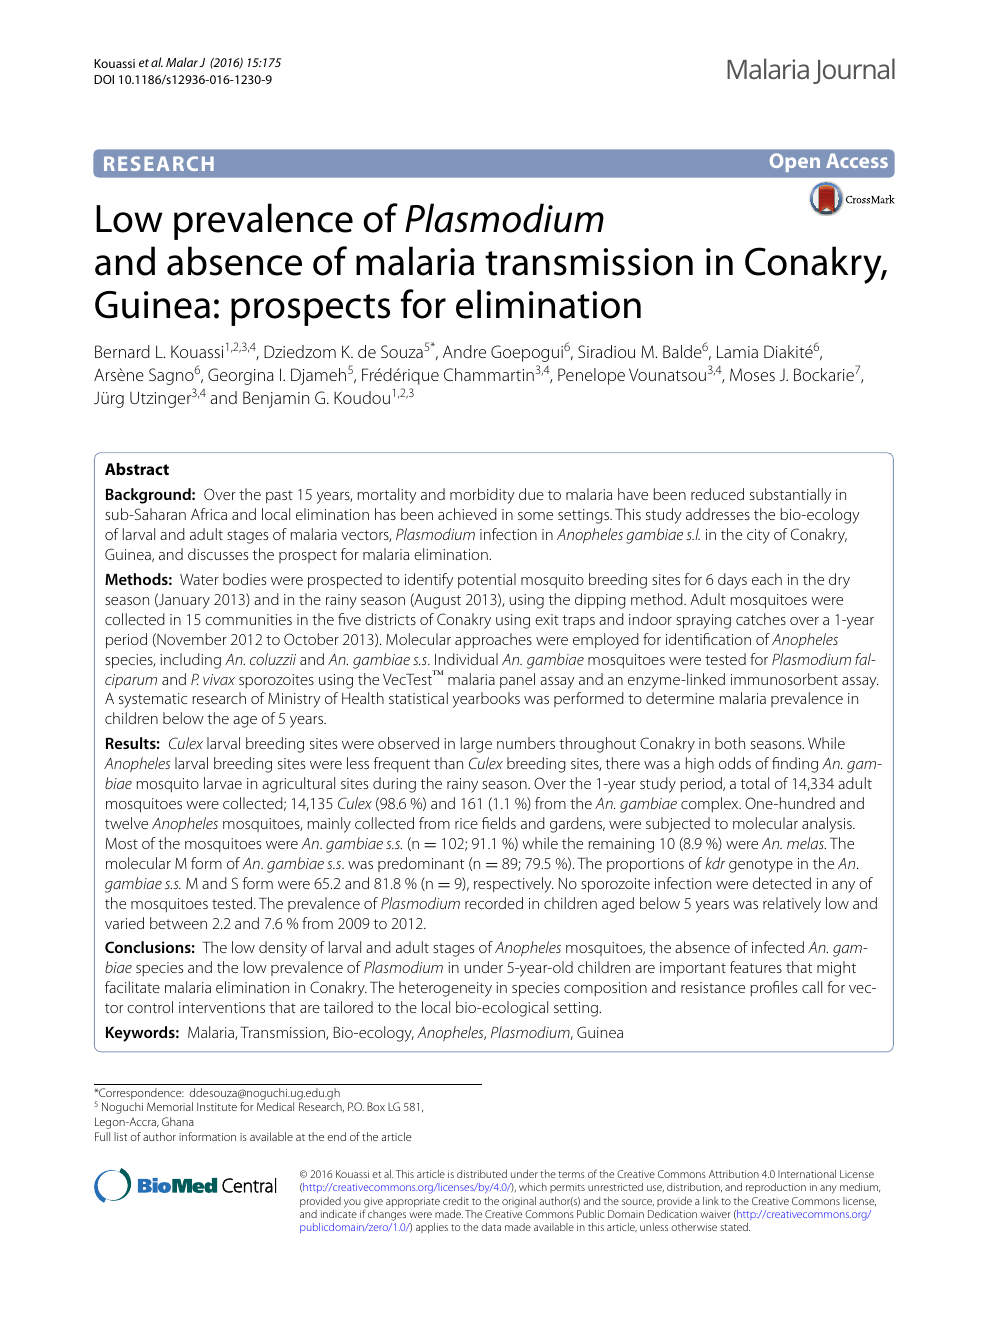 Low Prevalence Of Plasmodium And Absence Of Malaria Transmission In Conakry Guinea Prospects For Elimination Topic Of Research Paper In Health Sciences Download Scholarly Article Pdf And Read For Free On